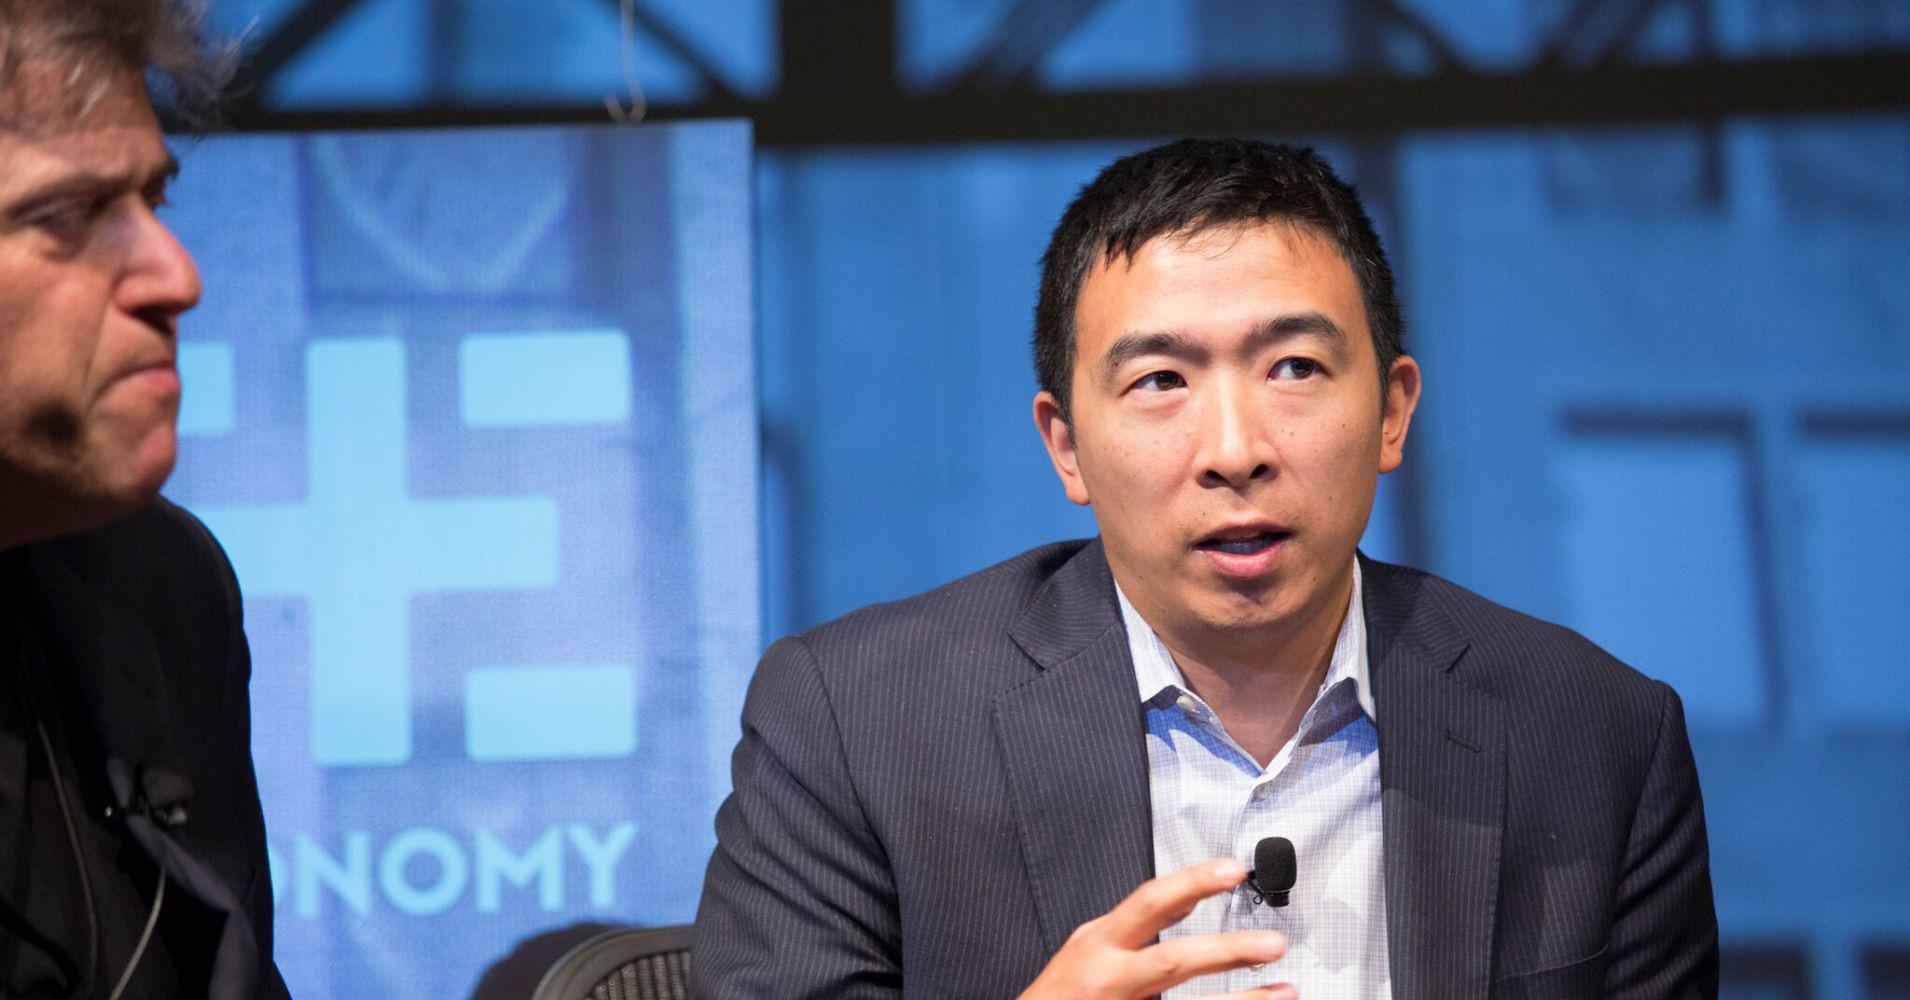 2020 US Presidential Candidate Andrew Yang is Pro Crypto and is Gaining Traction